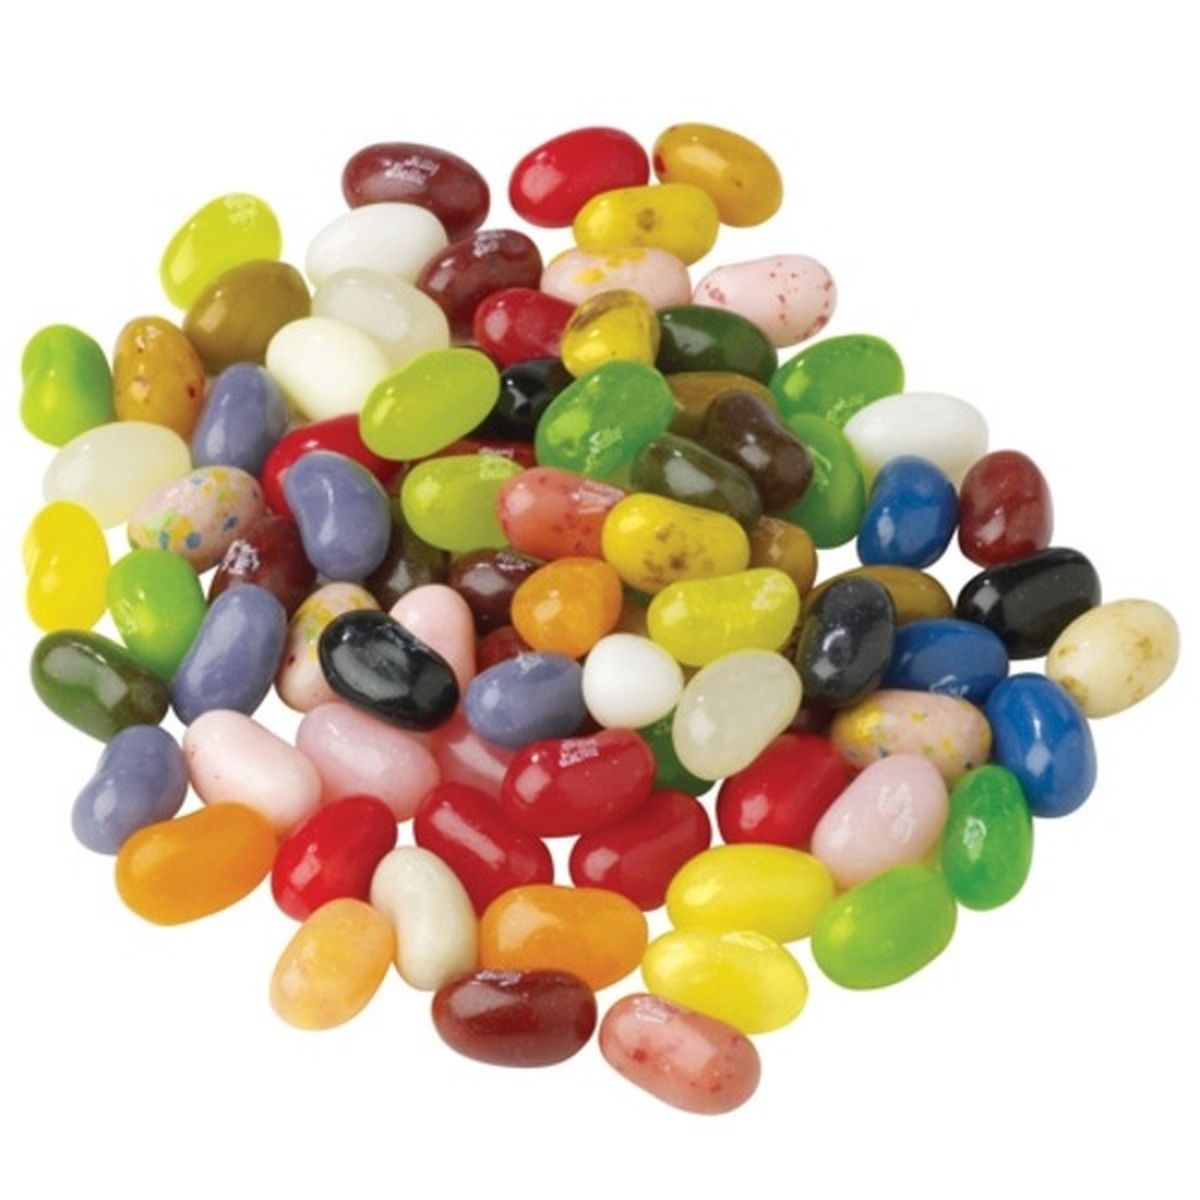 Calories in Jelly Beans, Assorted